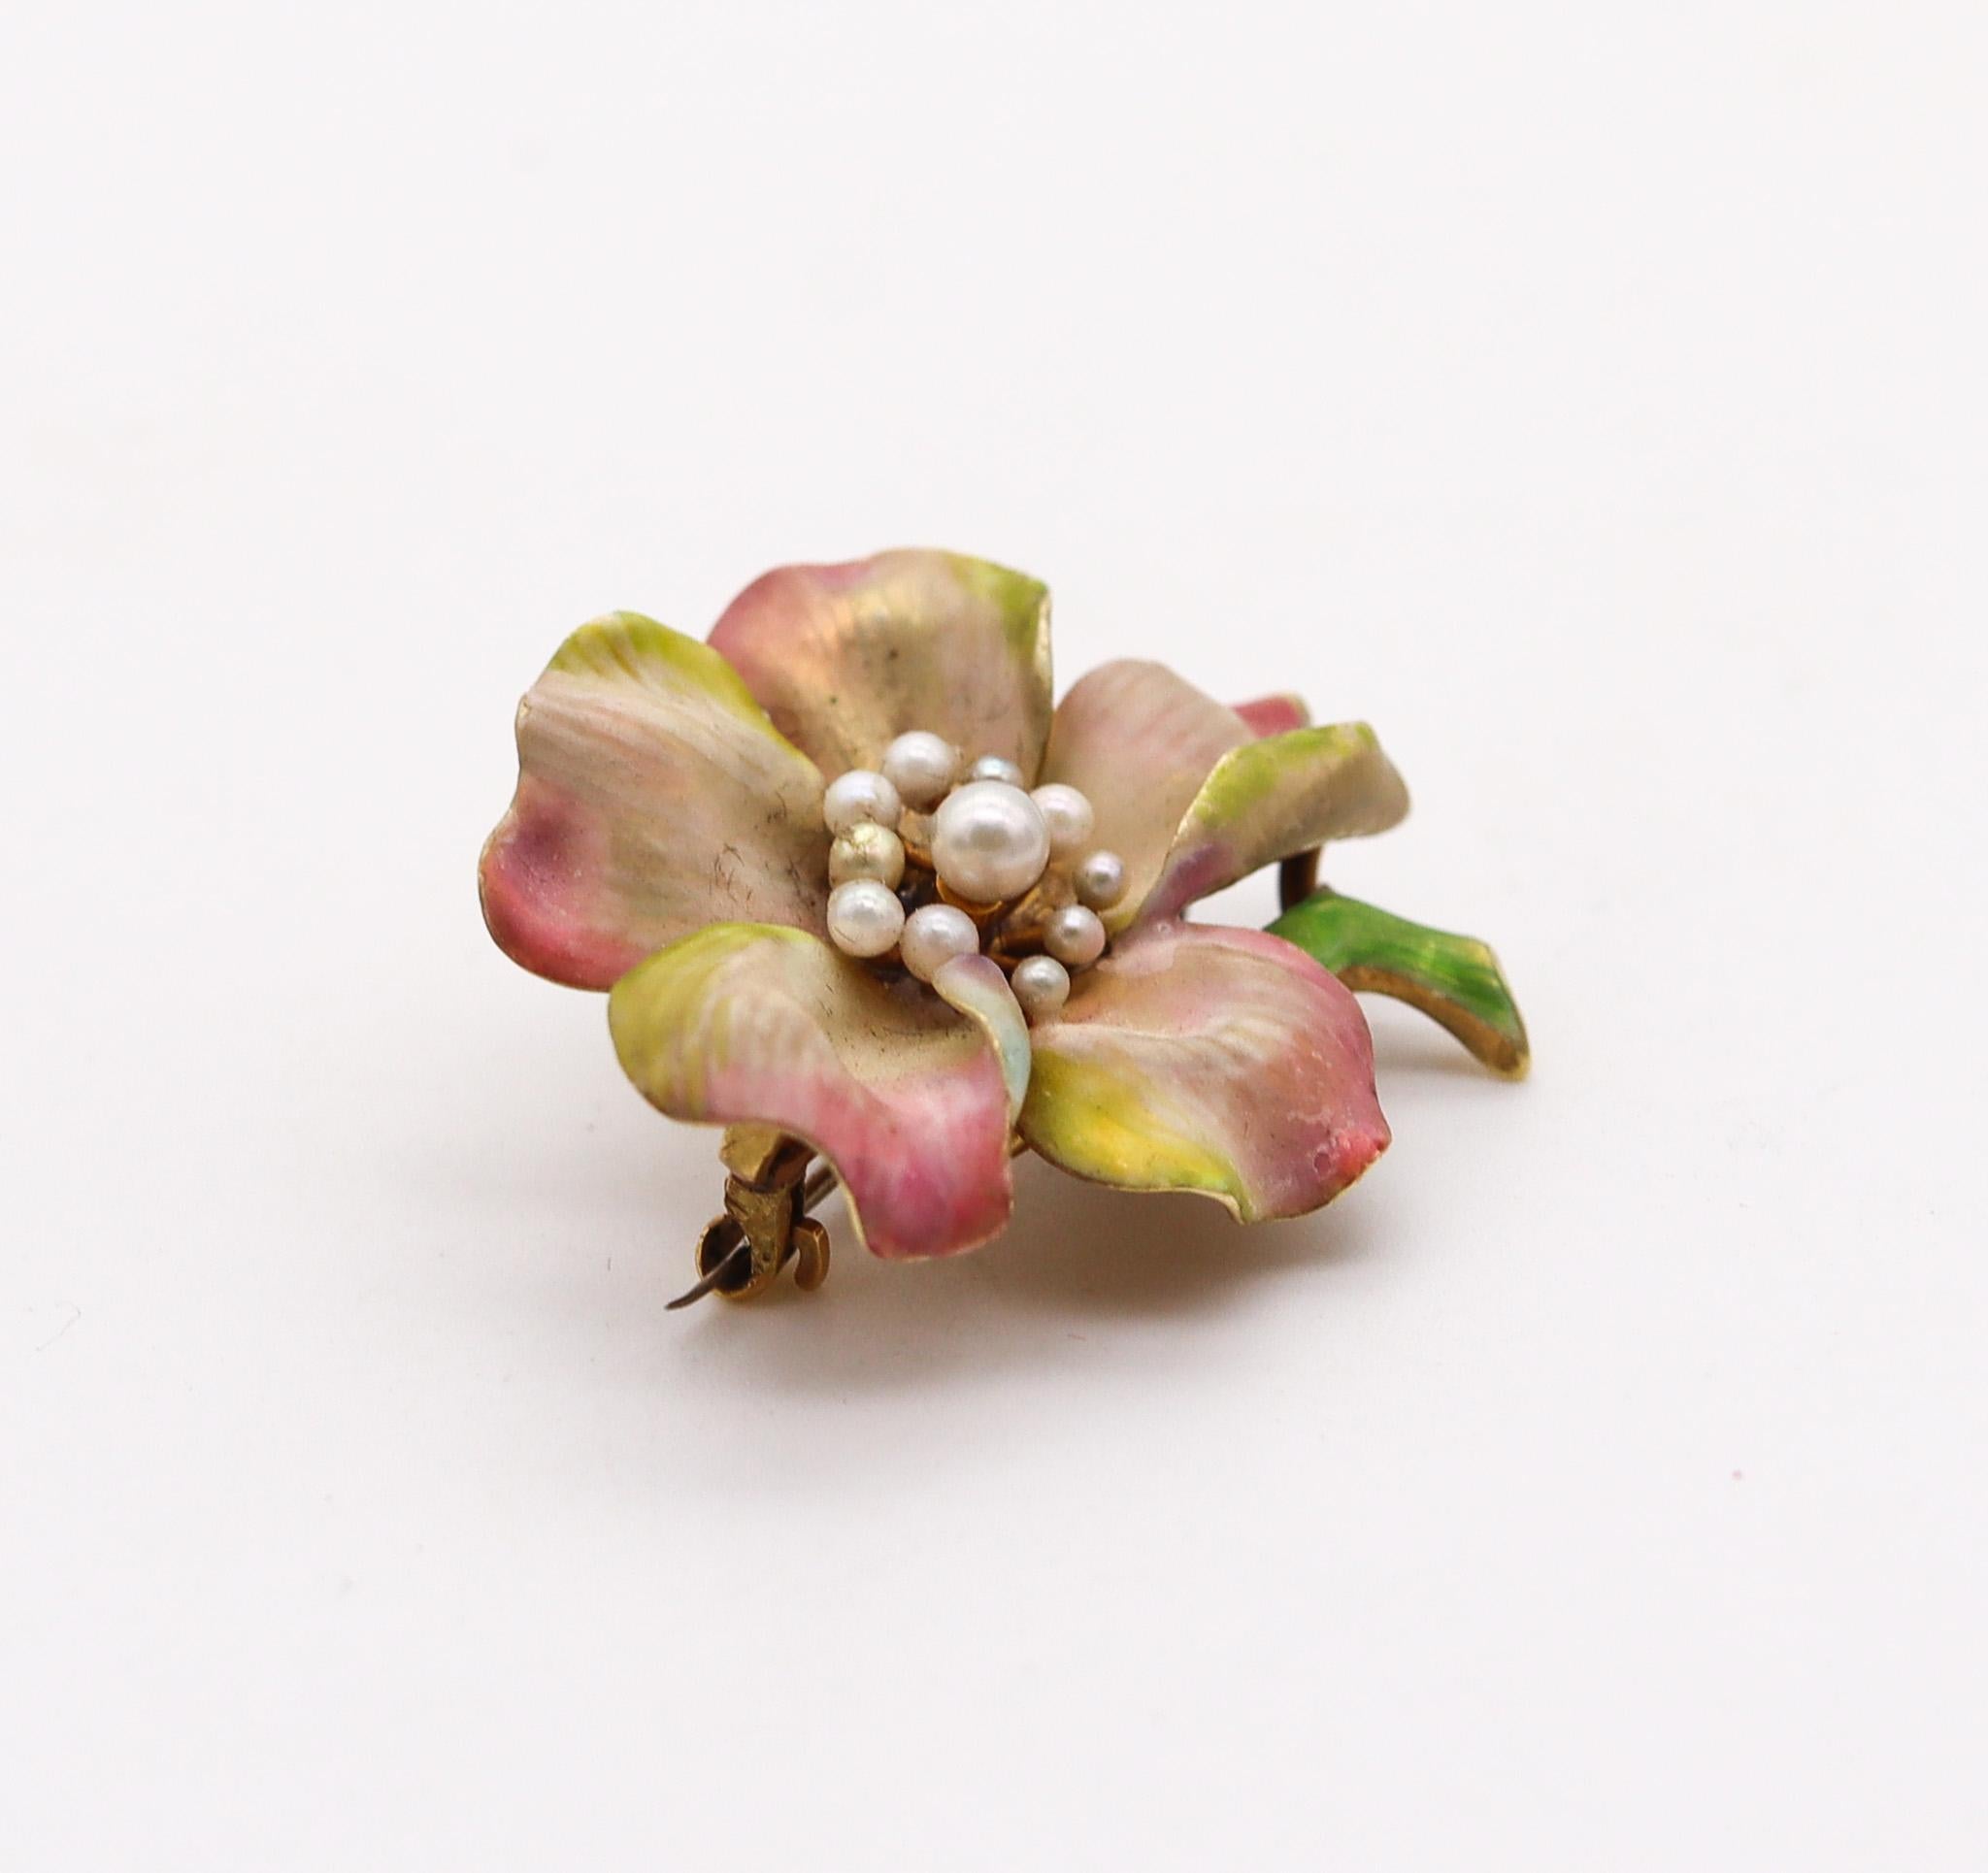 Edwardian art nouveau enamel Orchid brooch.

An exceptional three-dimensional piece, created in America during the Edwardian and the Art Nouveau periods, back in the 1901-1910. This rare beautiful pin brooch has been carefully crafted in the shape